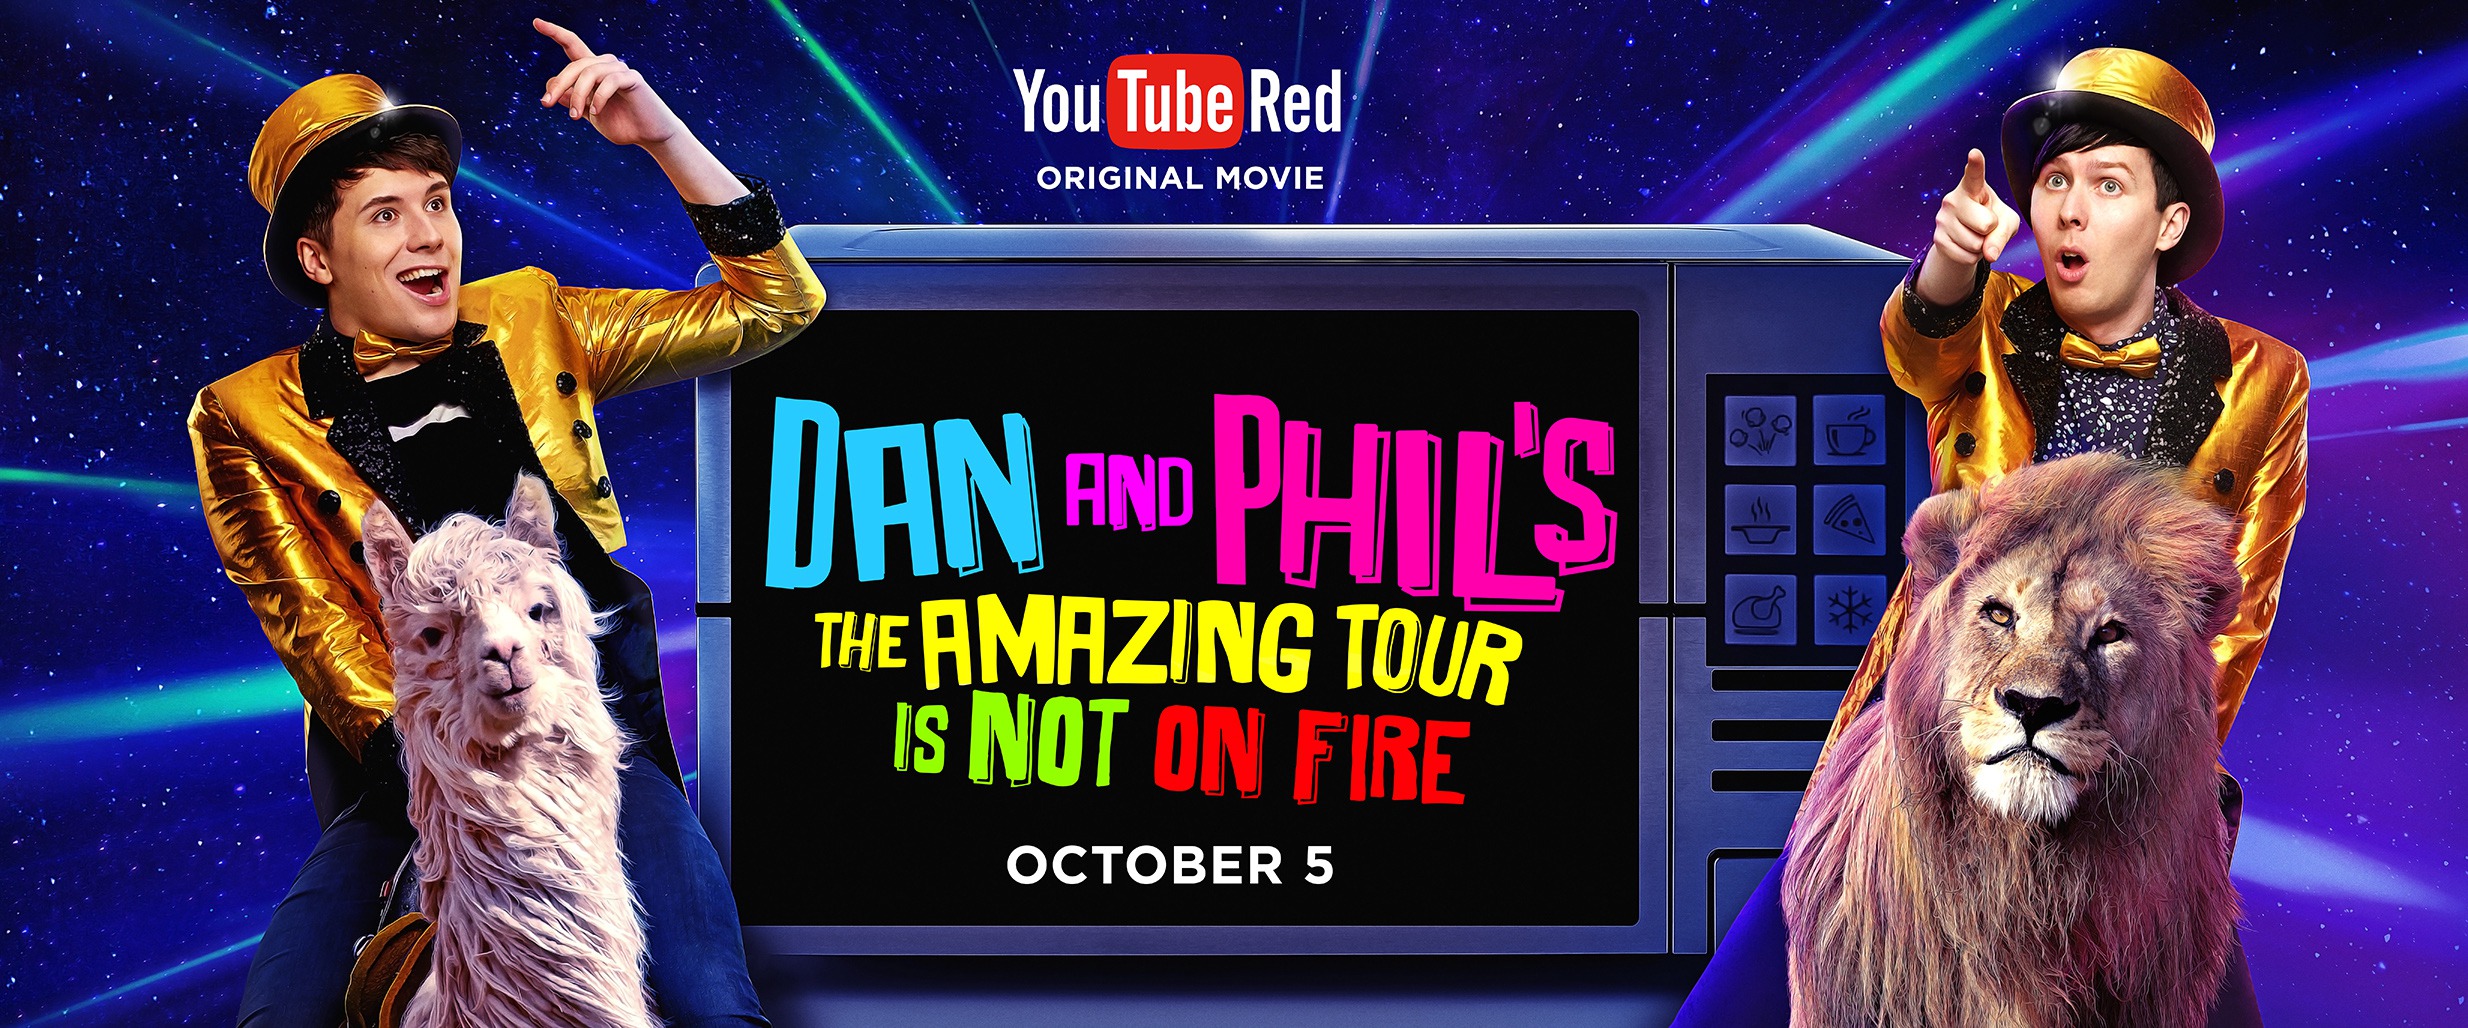 Mega Sized Movie Poster Image for Dan and Phil's Story of TATINOF (#2 of 2)